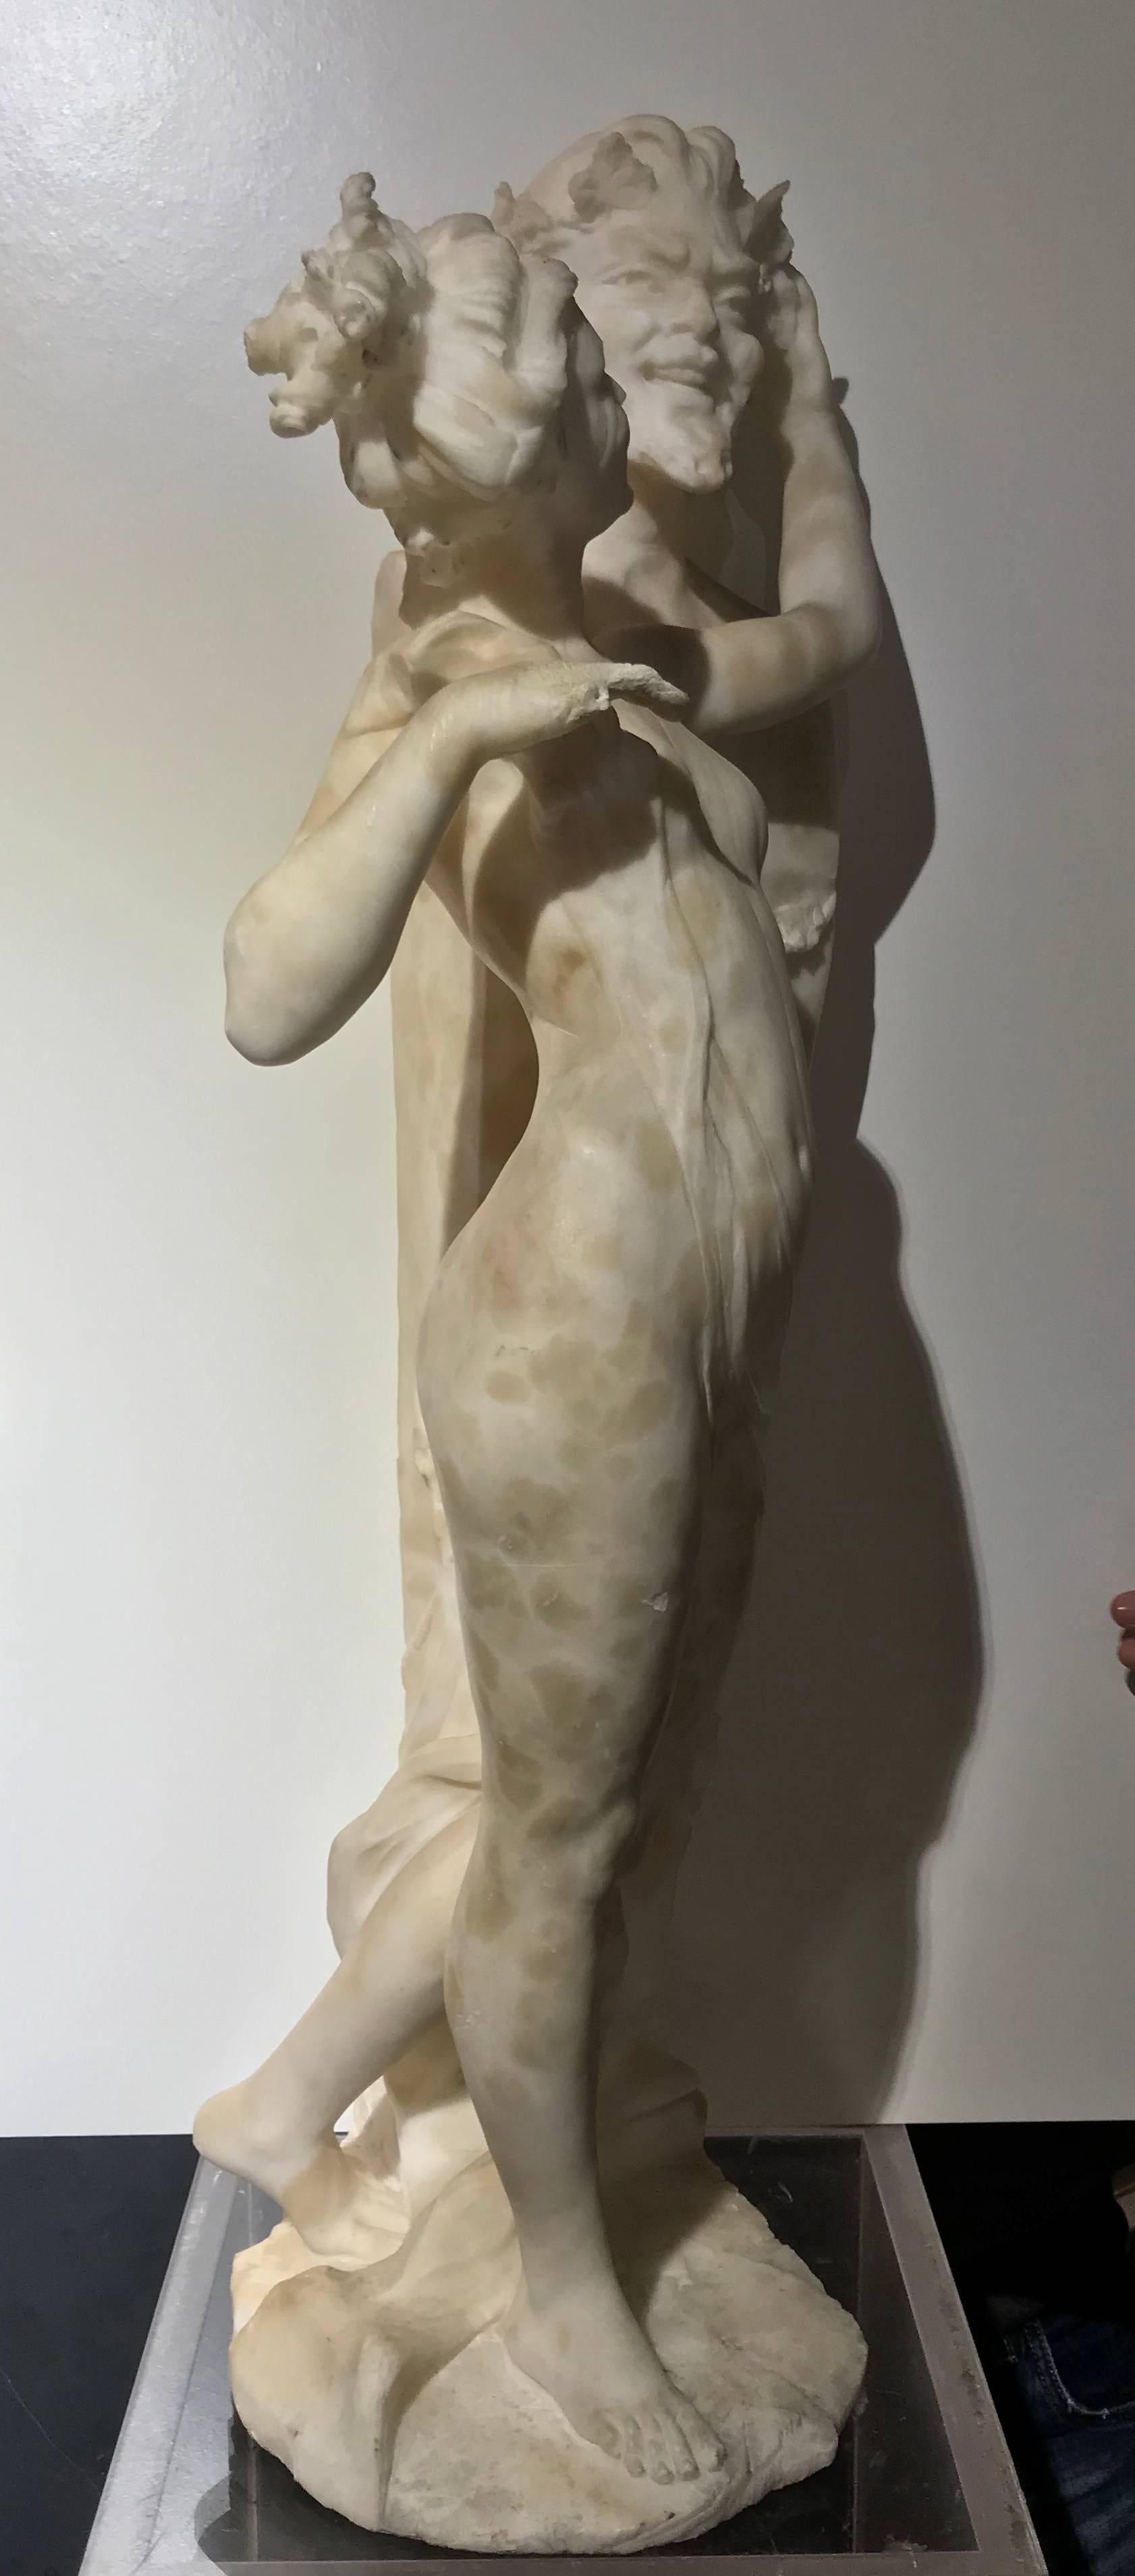 Hand-Carved Italian Sculpture 19th Century White Tuscany Alabaster Marble Signed Fiaschi